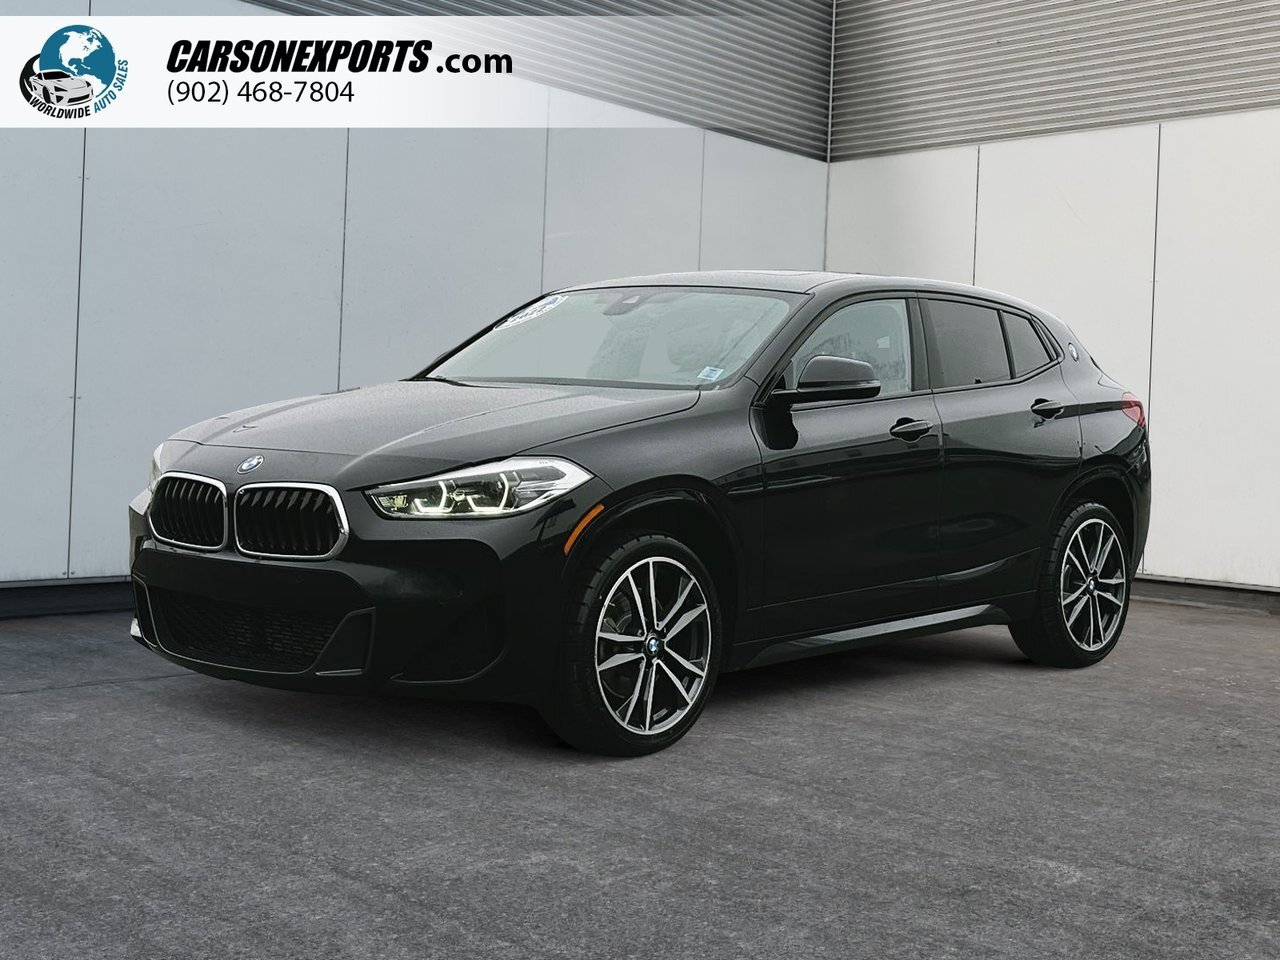 2022 BMW X2 XDrive28i The best place to buy a used car. Period